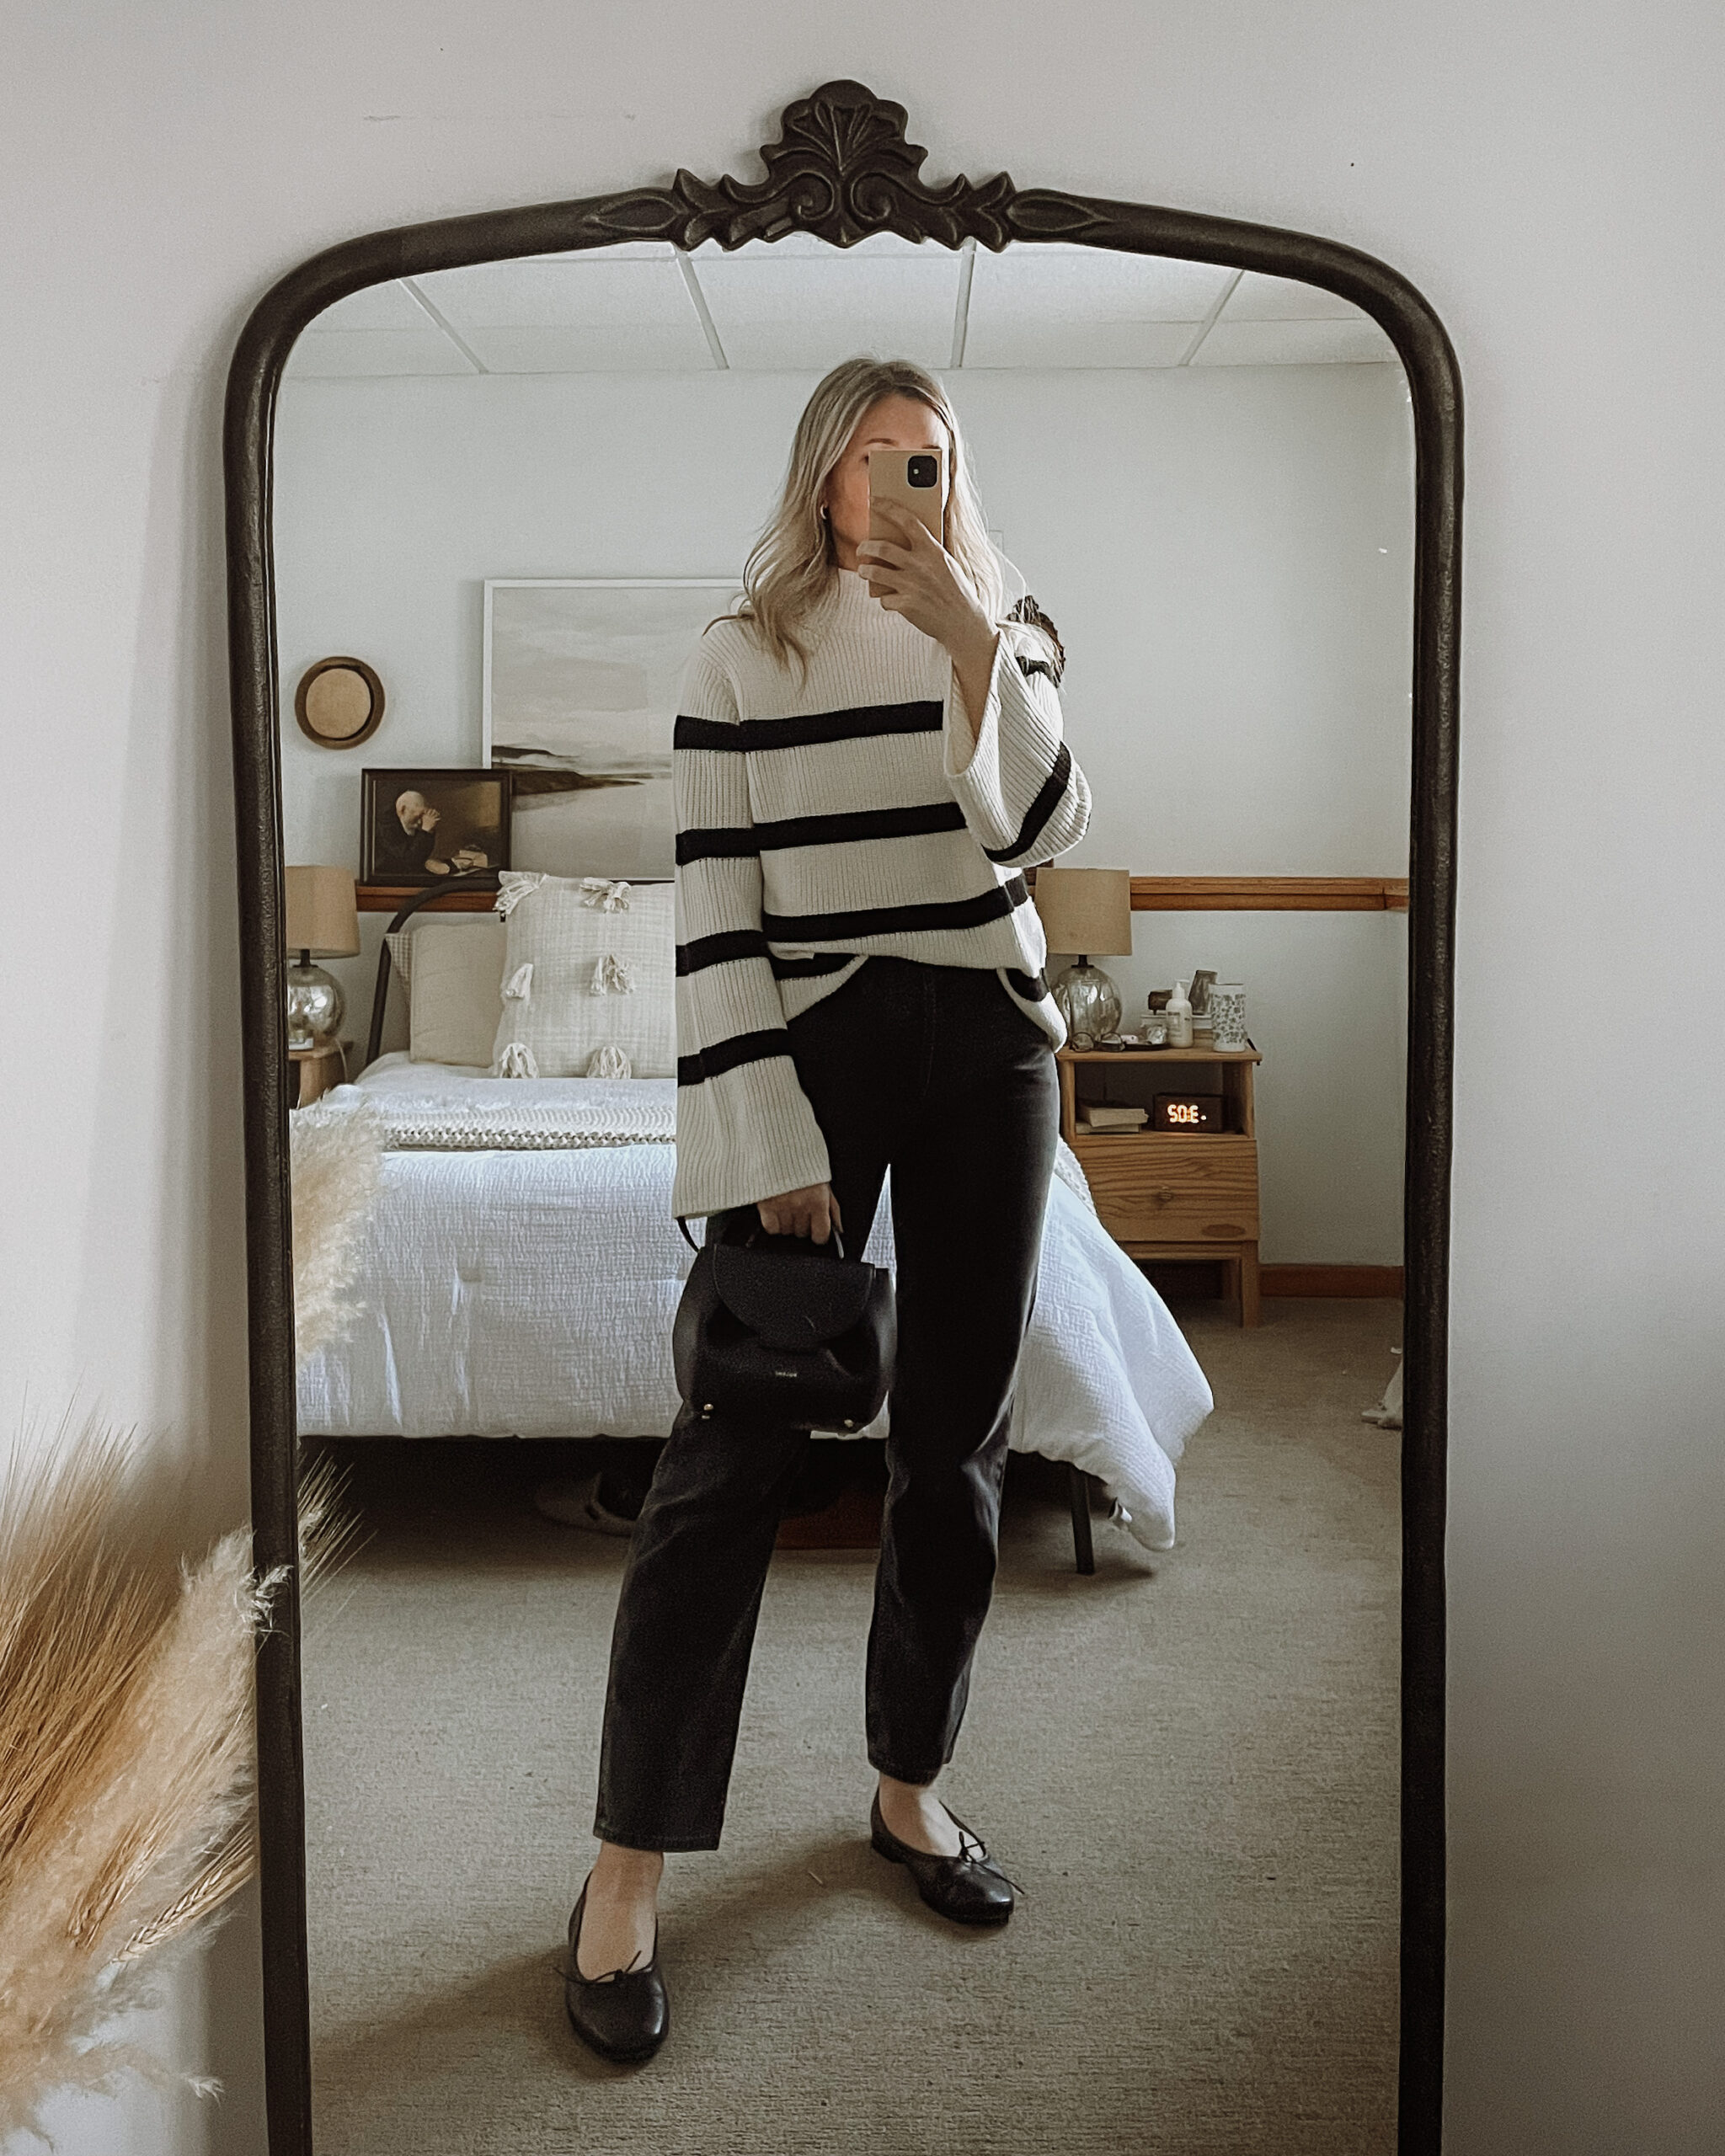 Karin Emily wears an oversized black and white striped sweater, black agolde 90's jeans, black ballet flats, and a black polene bag